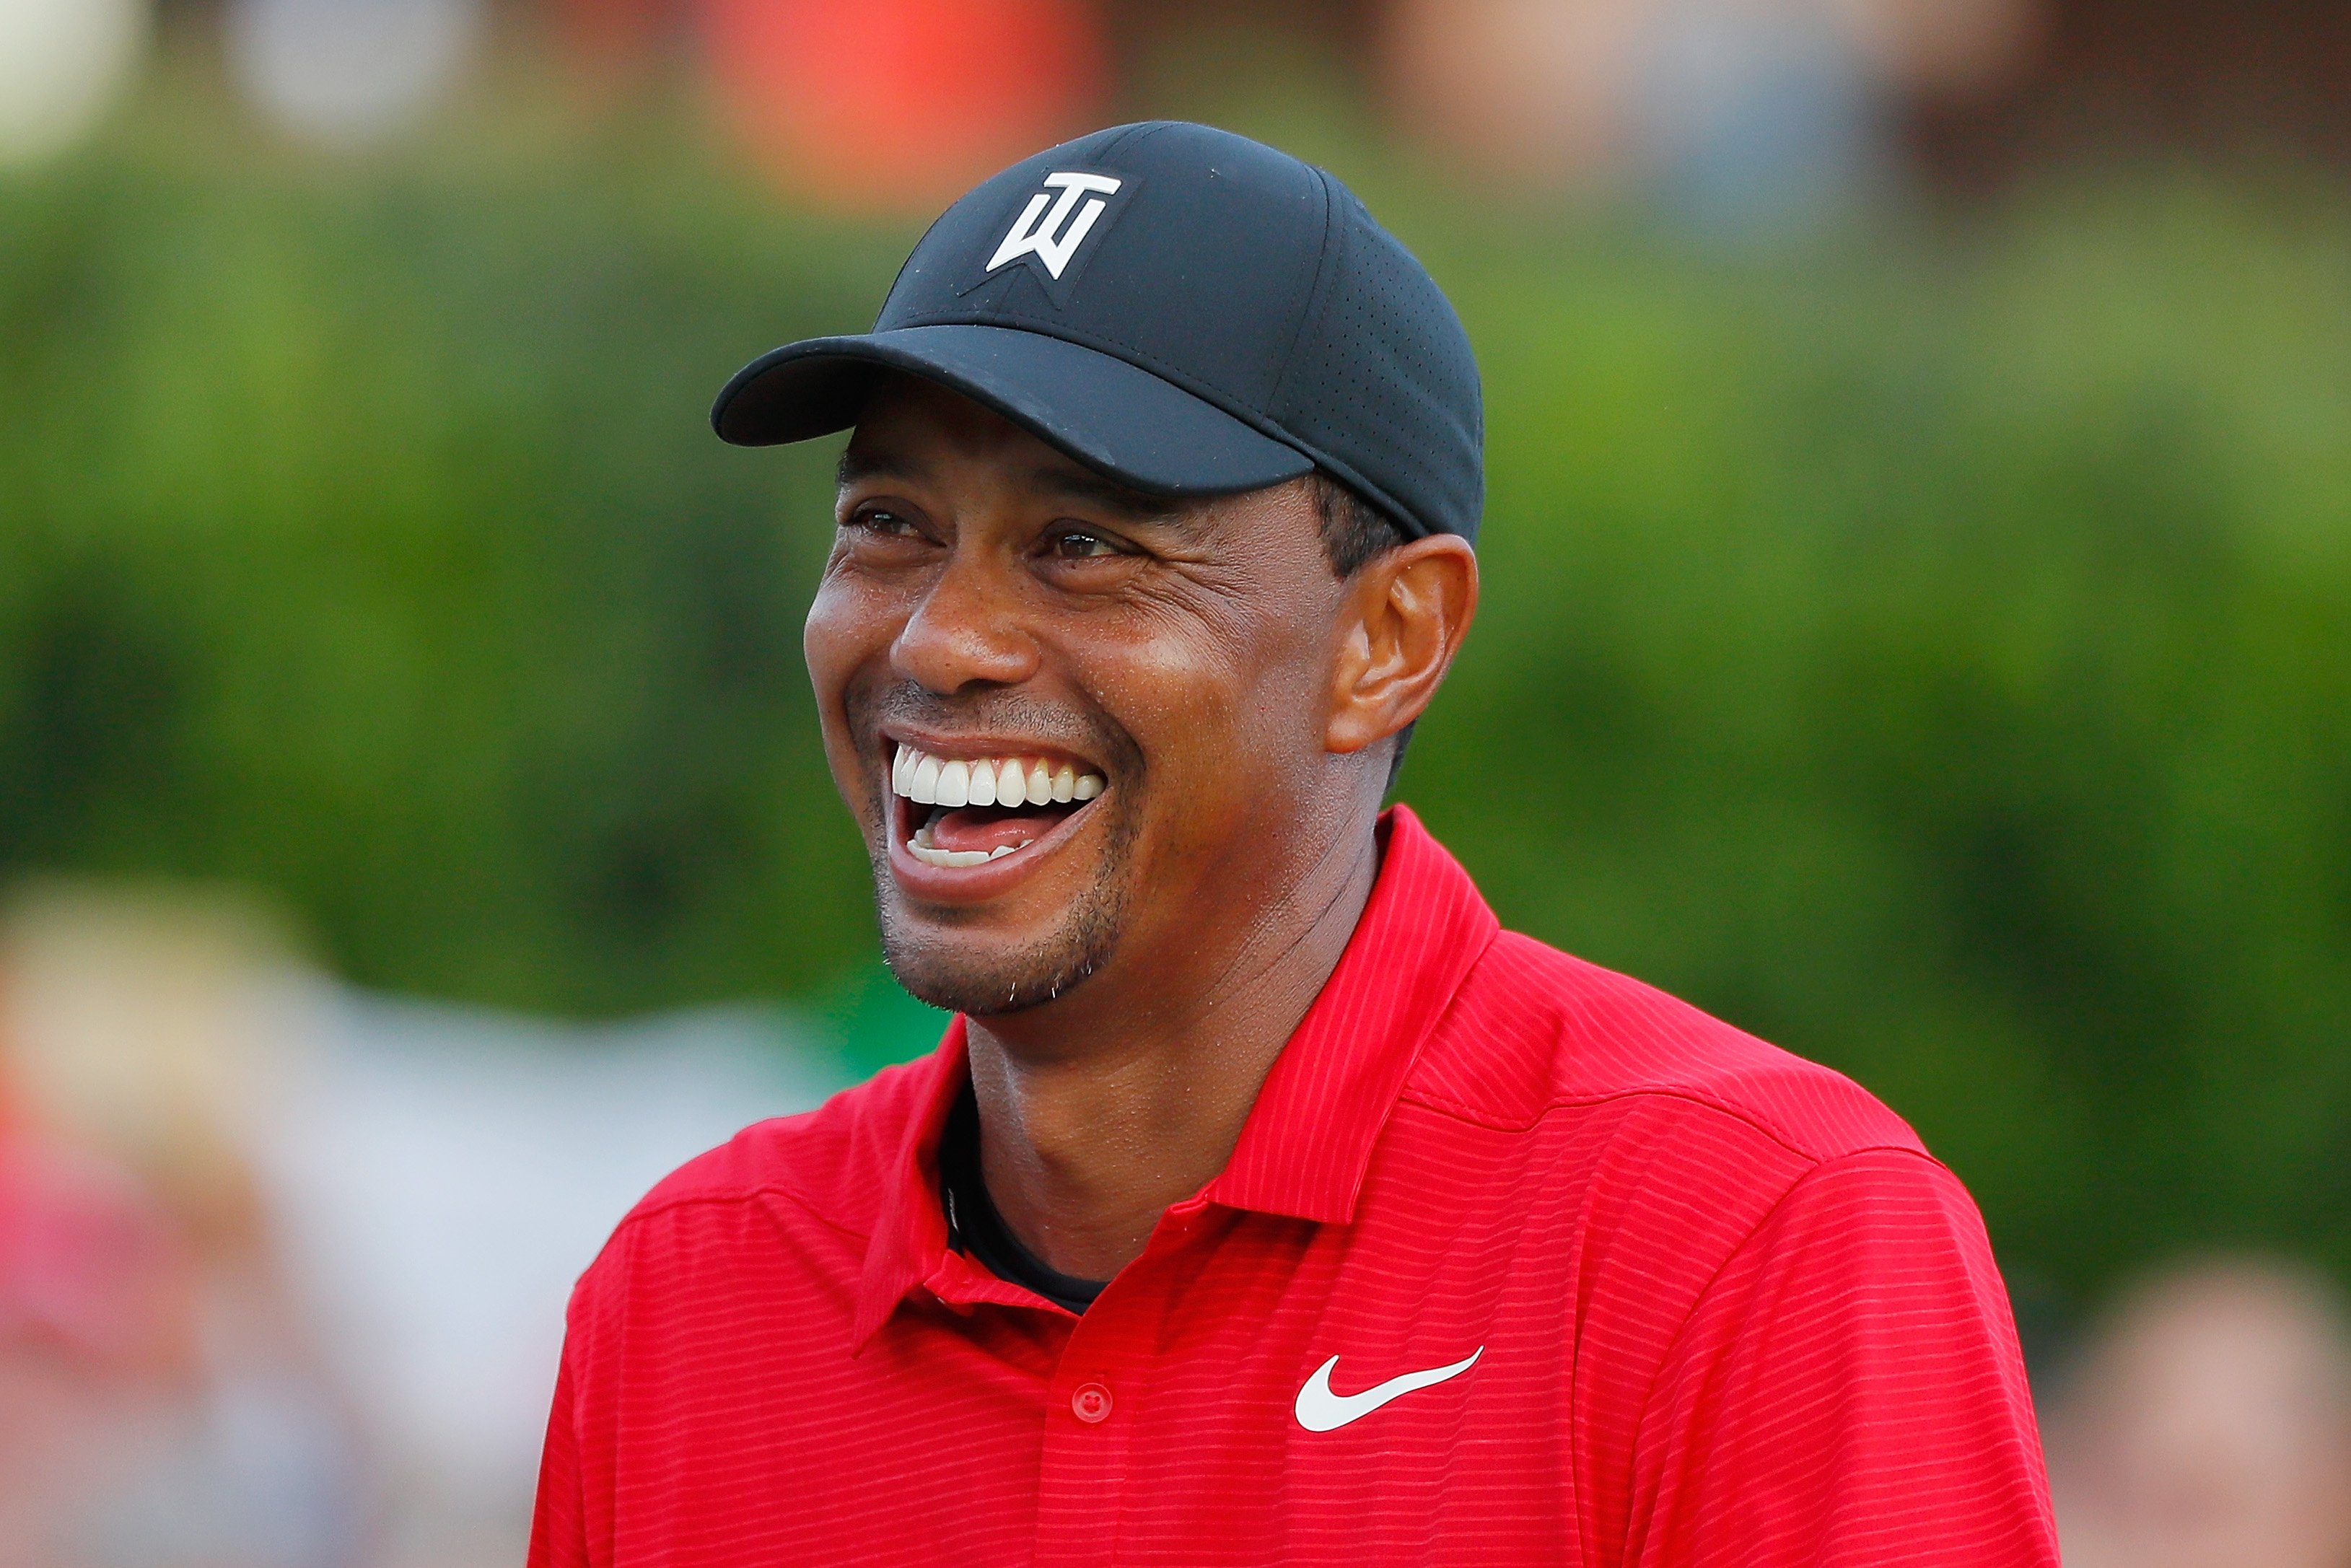 Tiger Woods when he won the Tour Championship on September, 23, 2018 in Atlanta, Georgia. | Photo: Getty Images